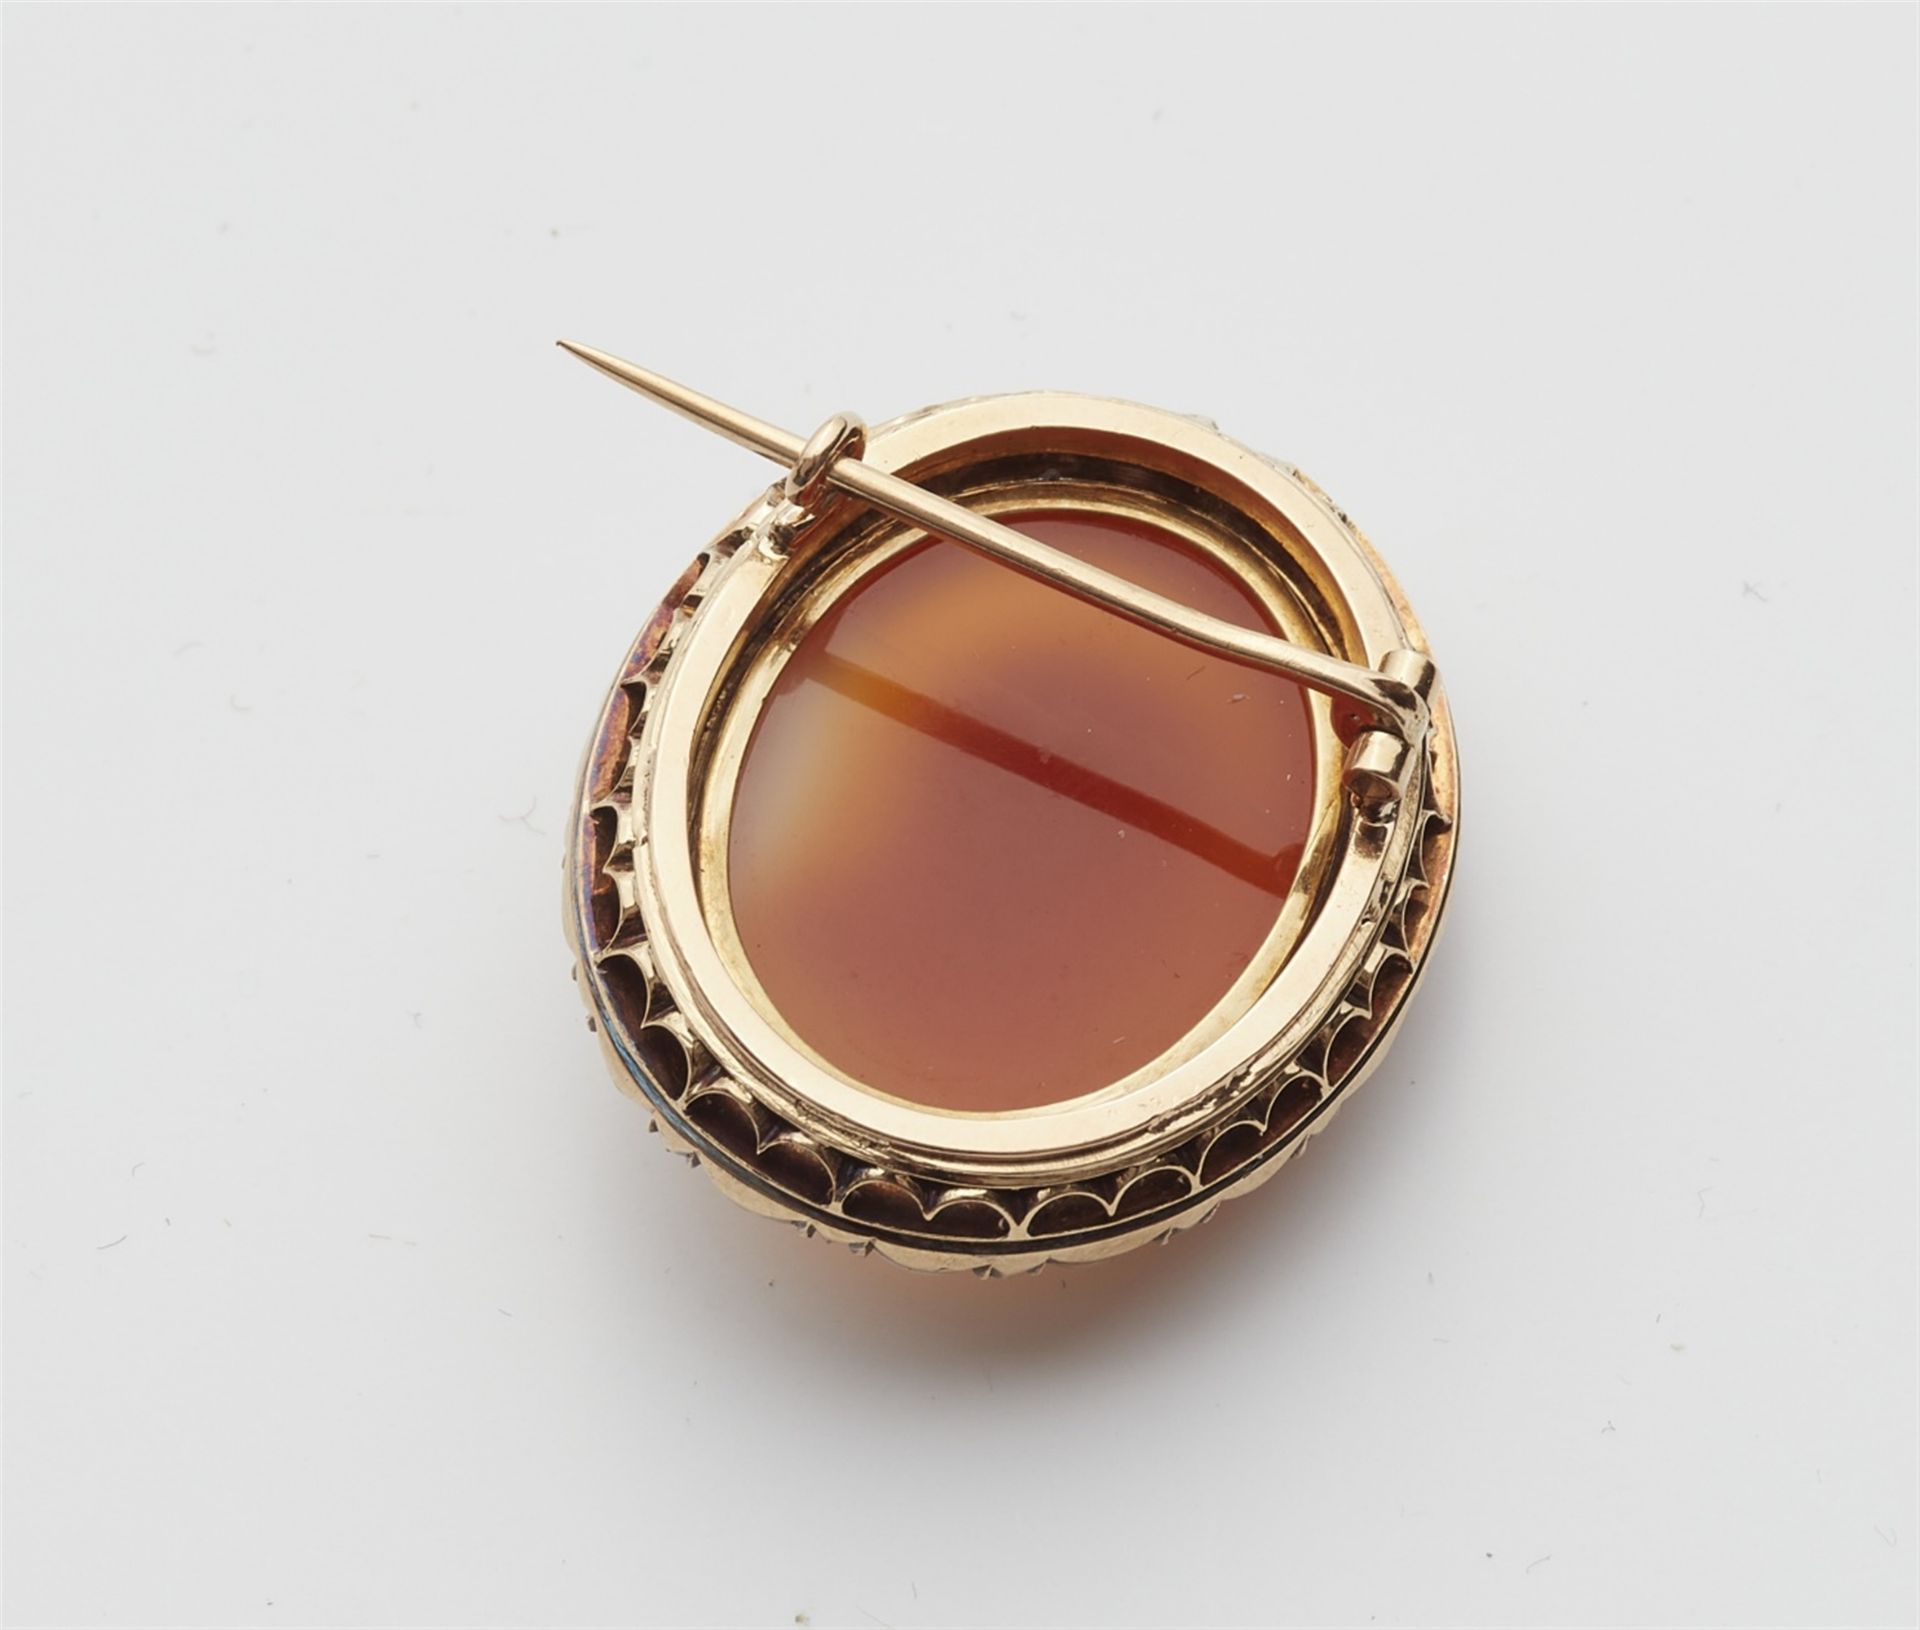 An 18k gold agate cameo and pearl brooch - Image 2 of 2